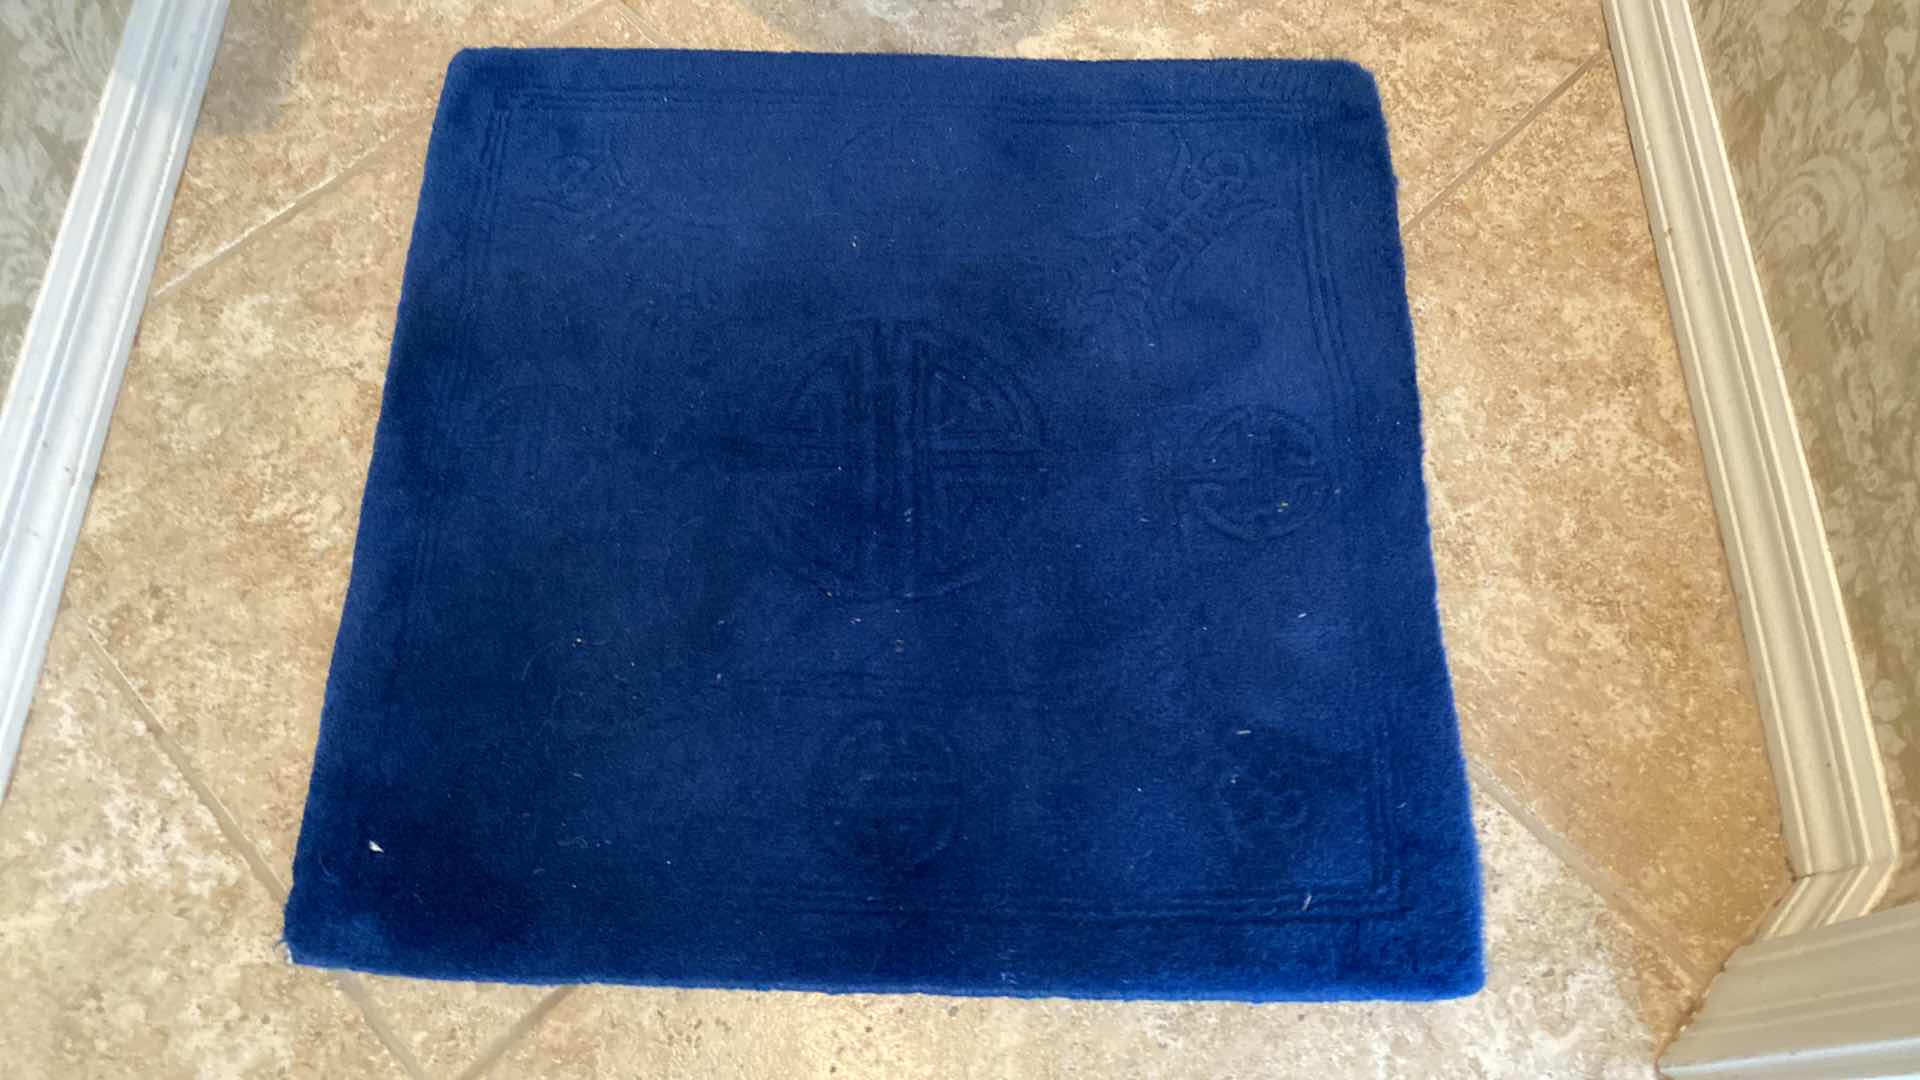 Photo 5 of HAND WOVEN IMPERIAL BLUE WOOL RUG FROM HONG KONG 23” x 24”